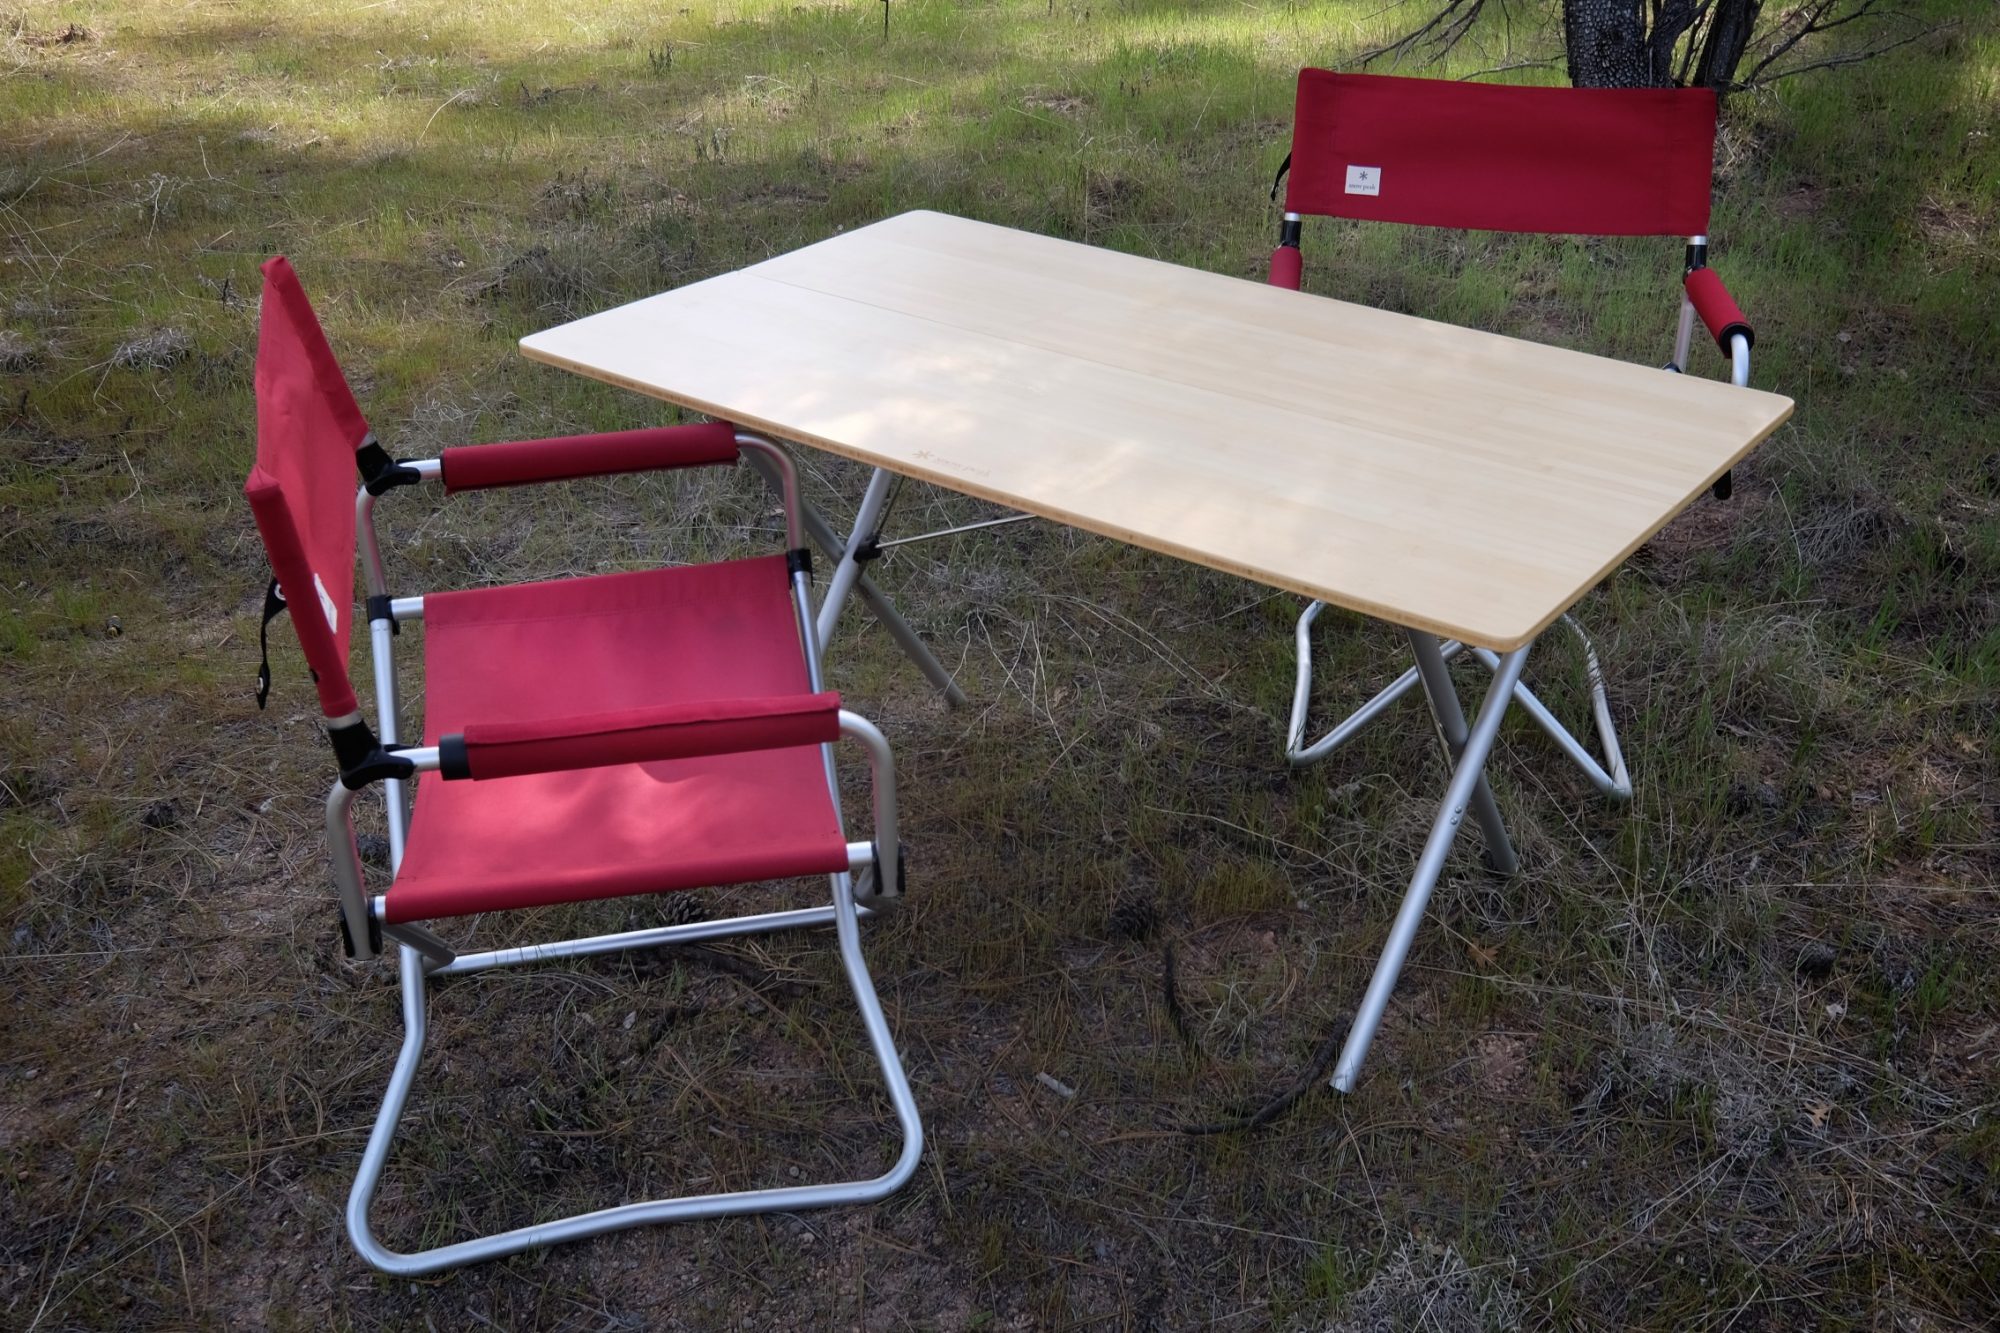 Field Tested: Snow Peak Single Action Table and Red Chairs